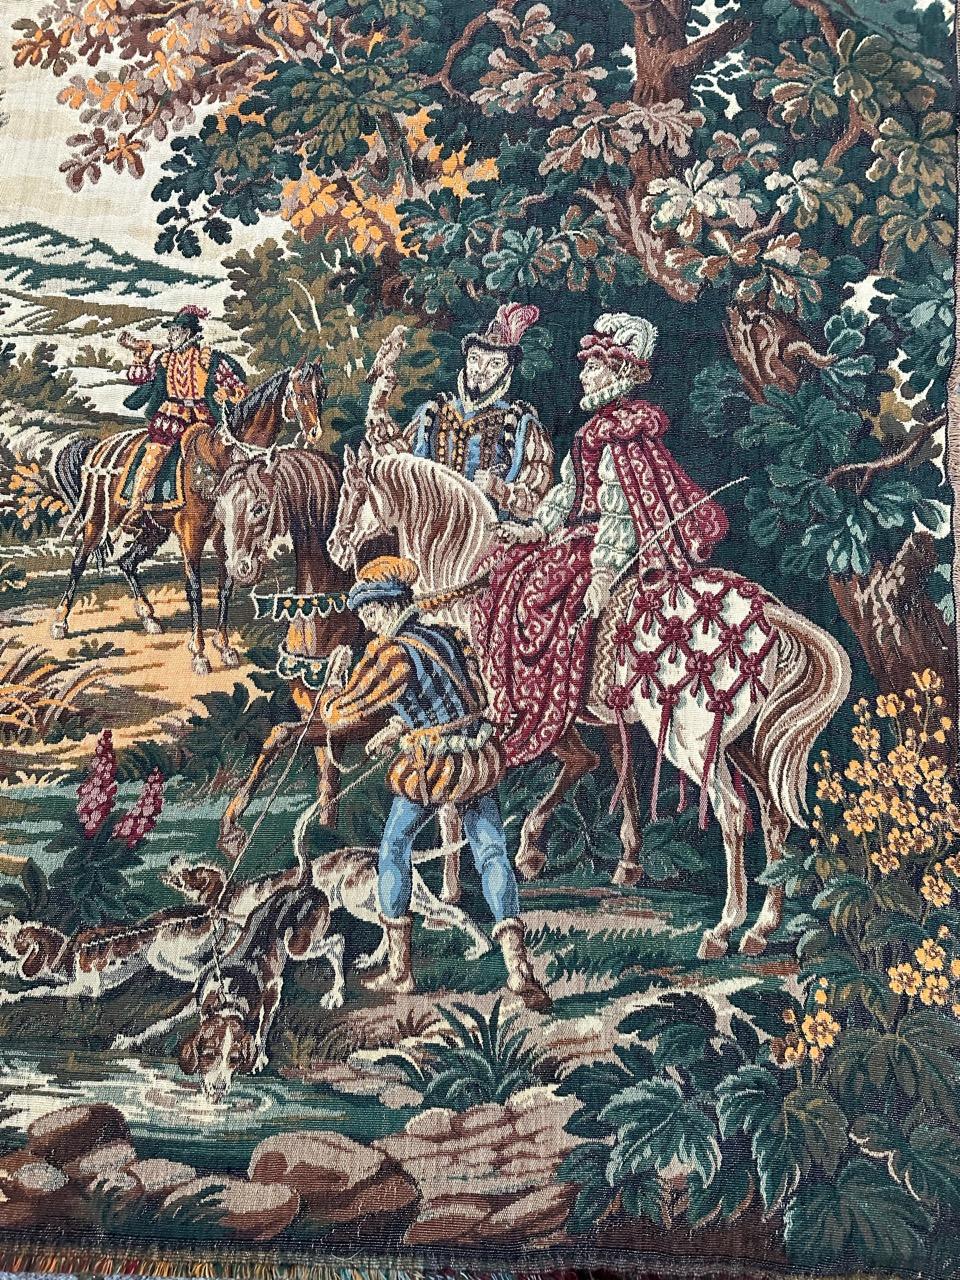 Hunting jacquard tapestry in style of Detti, Renaissance style, from which a climate of richness and frivolity emerges from this scene.
The Renaissance profoundly changed the art of tapestry. The taste for large decorative frescoes was reborn, but